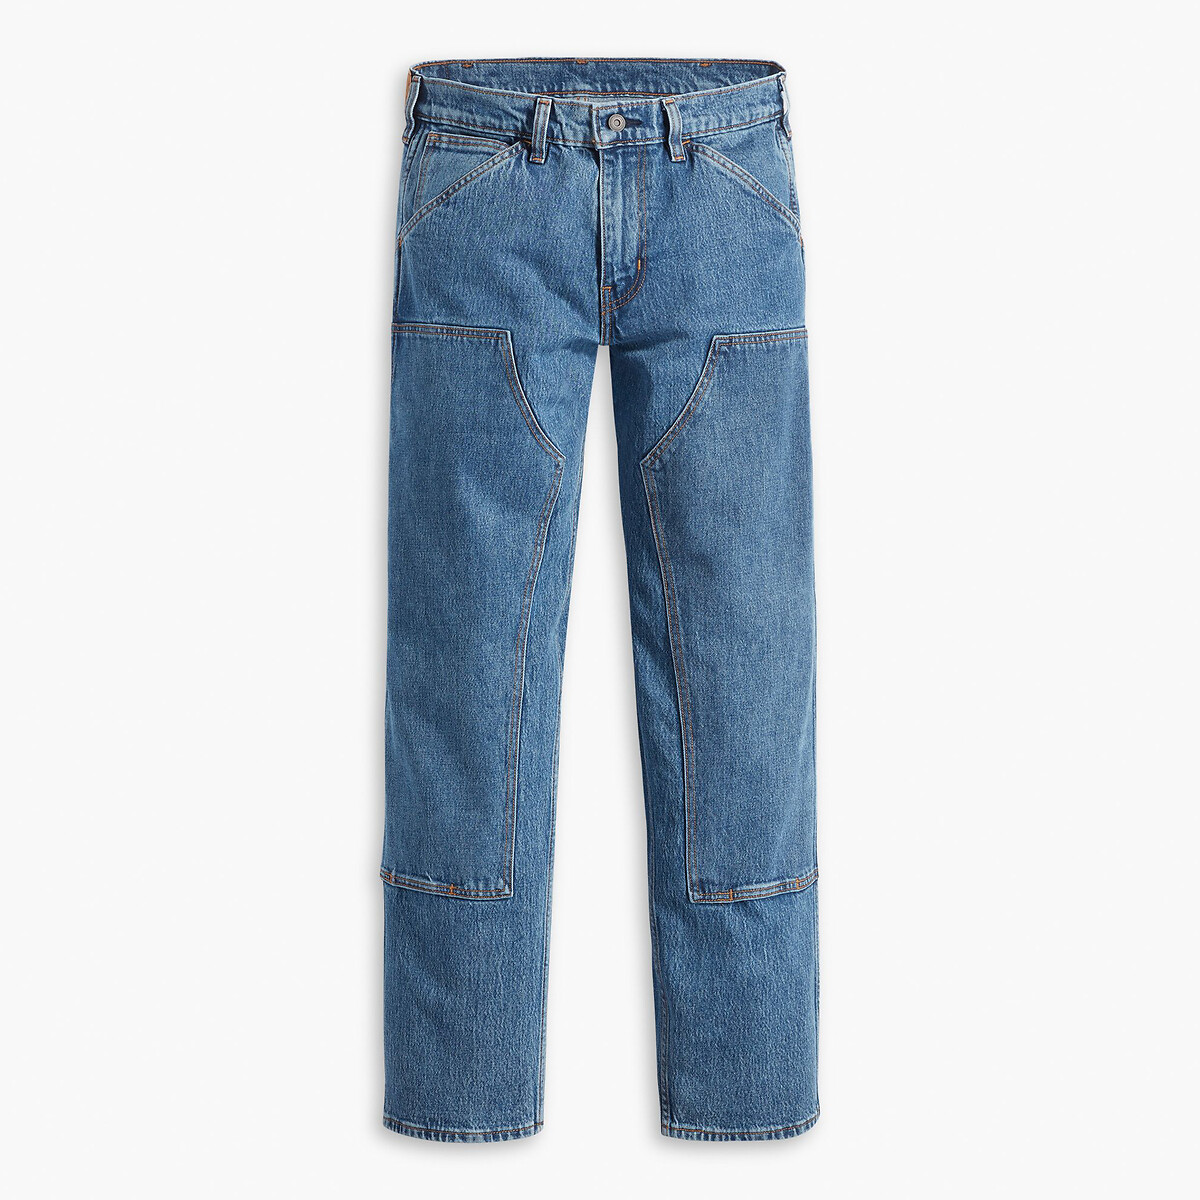 Image of Workwear Carpenter Jeans in Mid Rise